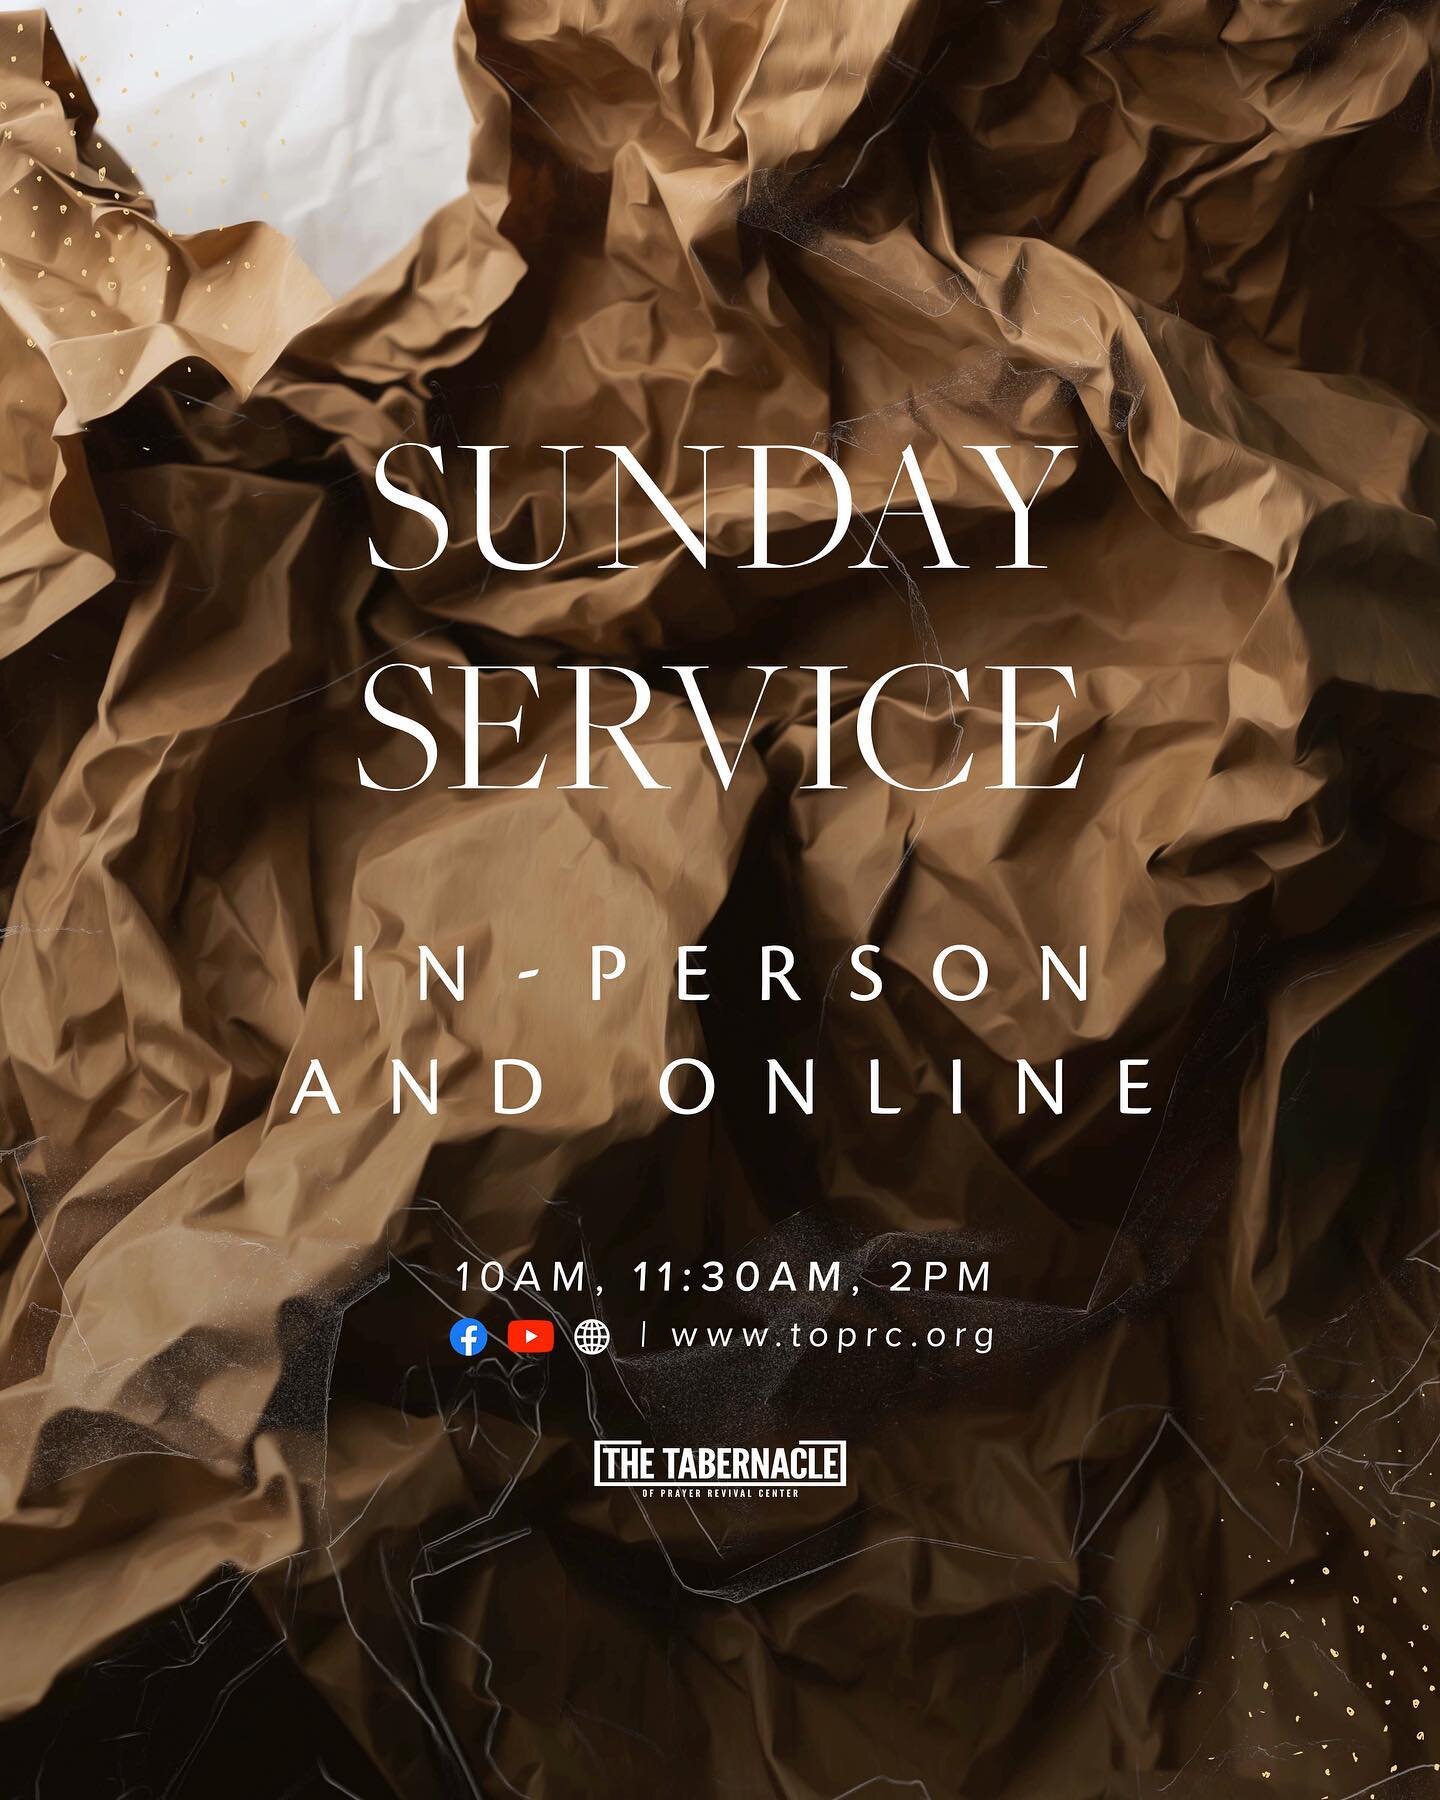 NEW SERVICE TIMES!
Join us this weekend at The Tabernacle 🙌🏾

*If you would like to join us in-person please be sure to register in advance right on our website*

#thetabernacle #toprc